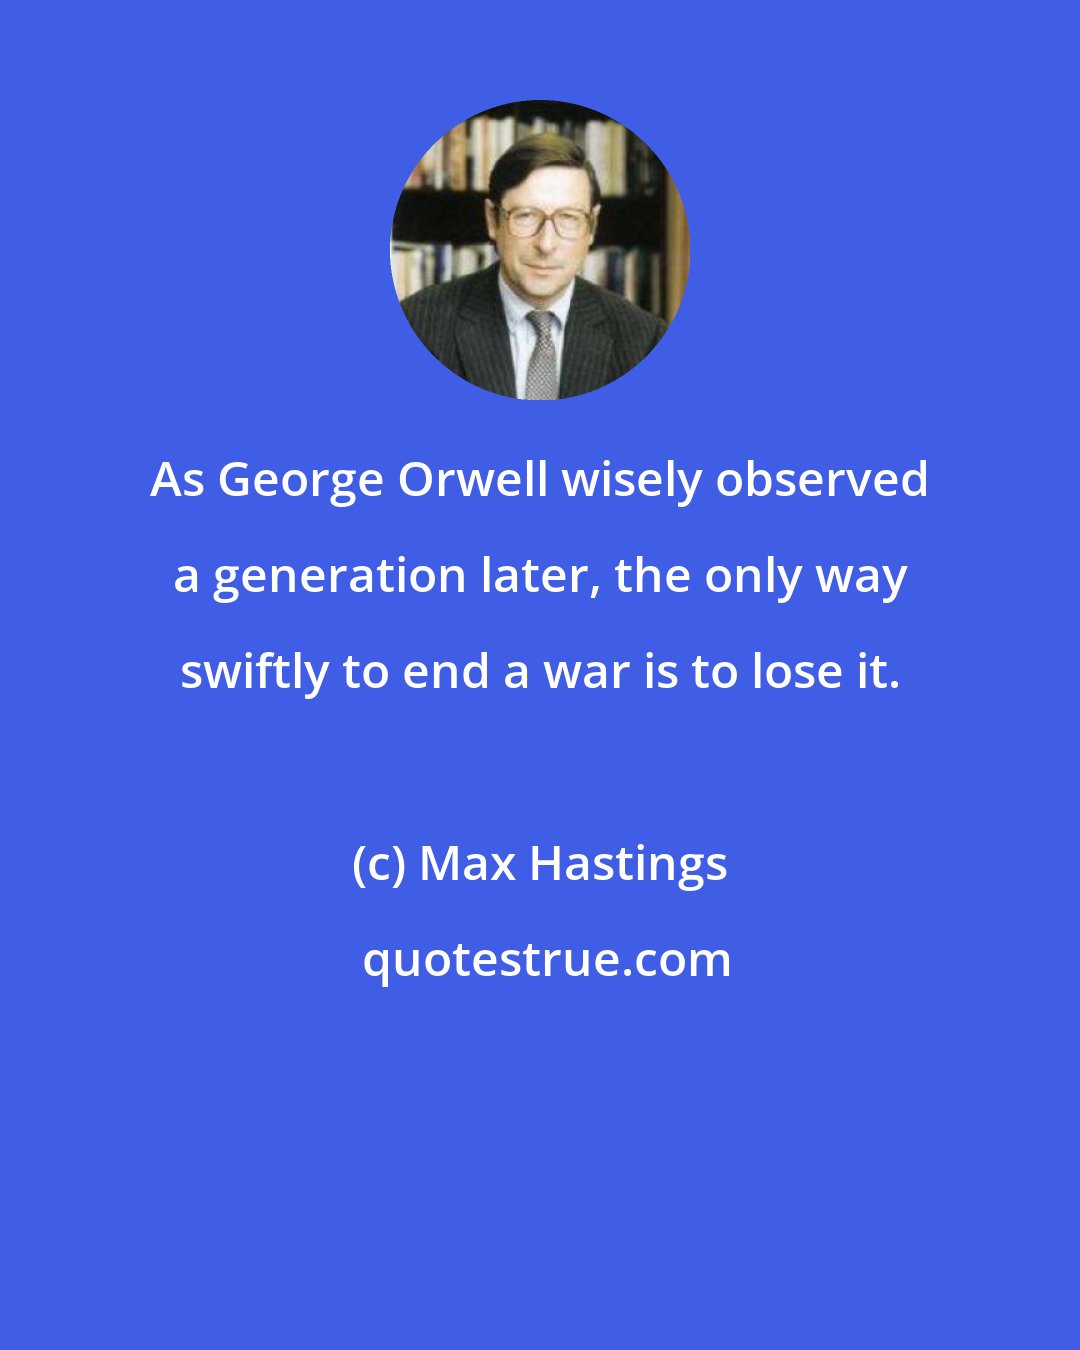 Max Hastings: As George Orwell wisely observed a generation later, the only way swiftly to end a war is to lose it.